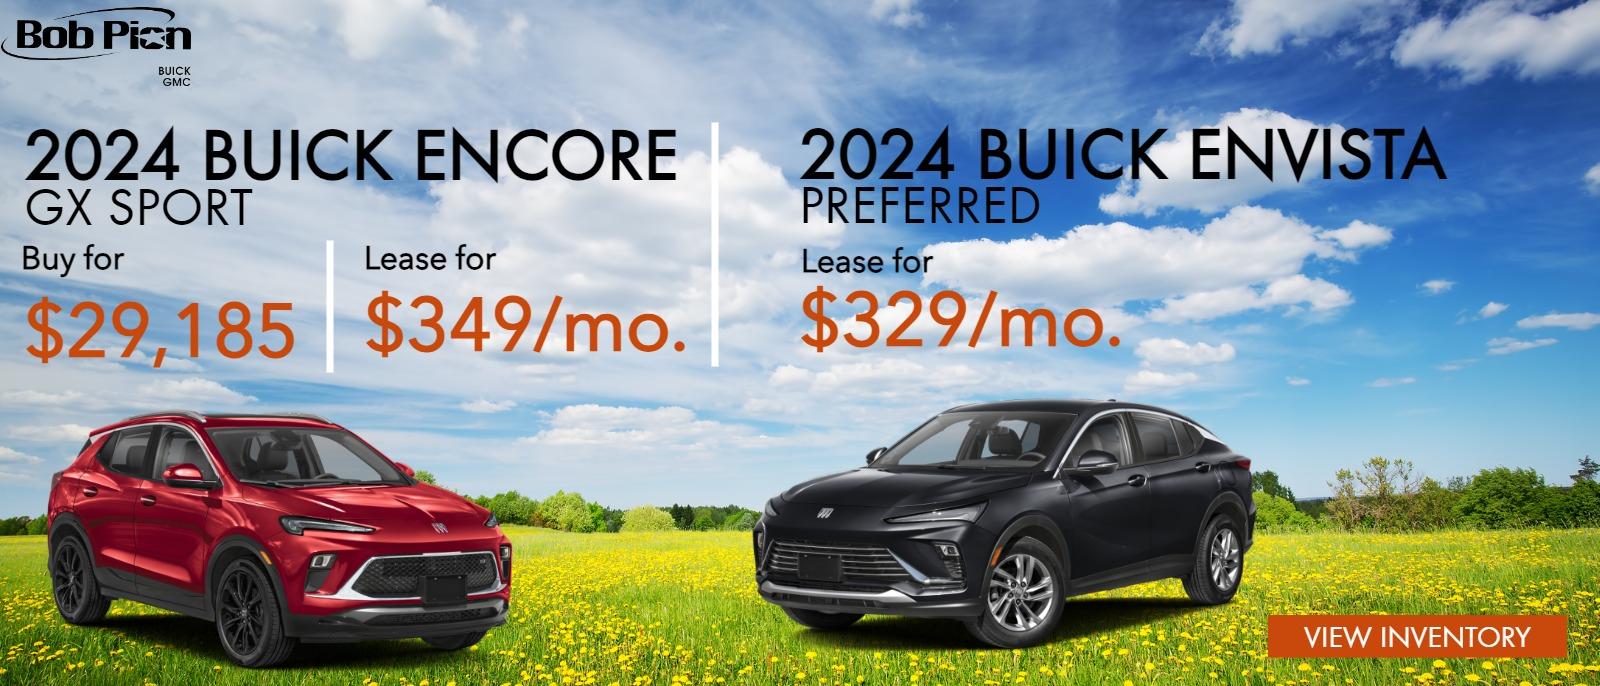 .B242031 2024 Buick Encore GX Sport: Lease for $349/mo Save $660 OFF MSRP ($3349 D.A.S, Not all will qualify, Must have A+ Tier Credit, Lease Loyalty Rebate, $0 Acquisition Fee)
Buy for $29,185 Save $500 OFF MSRP

4.B249018 2024 Buick Envista Preferred: Lease for $329/mo Save $585 OFF MSRP ($3329 D.A.S, Not all will qualify, Must have A+ Tier Credit, Lease Loyalty Rebate, $0 Acquisition Fee)